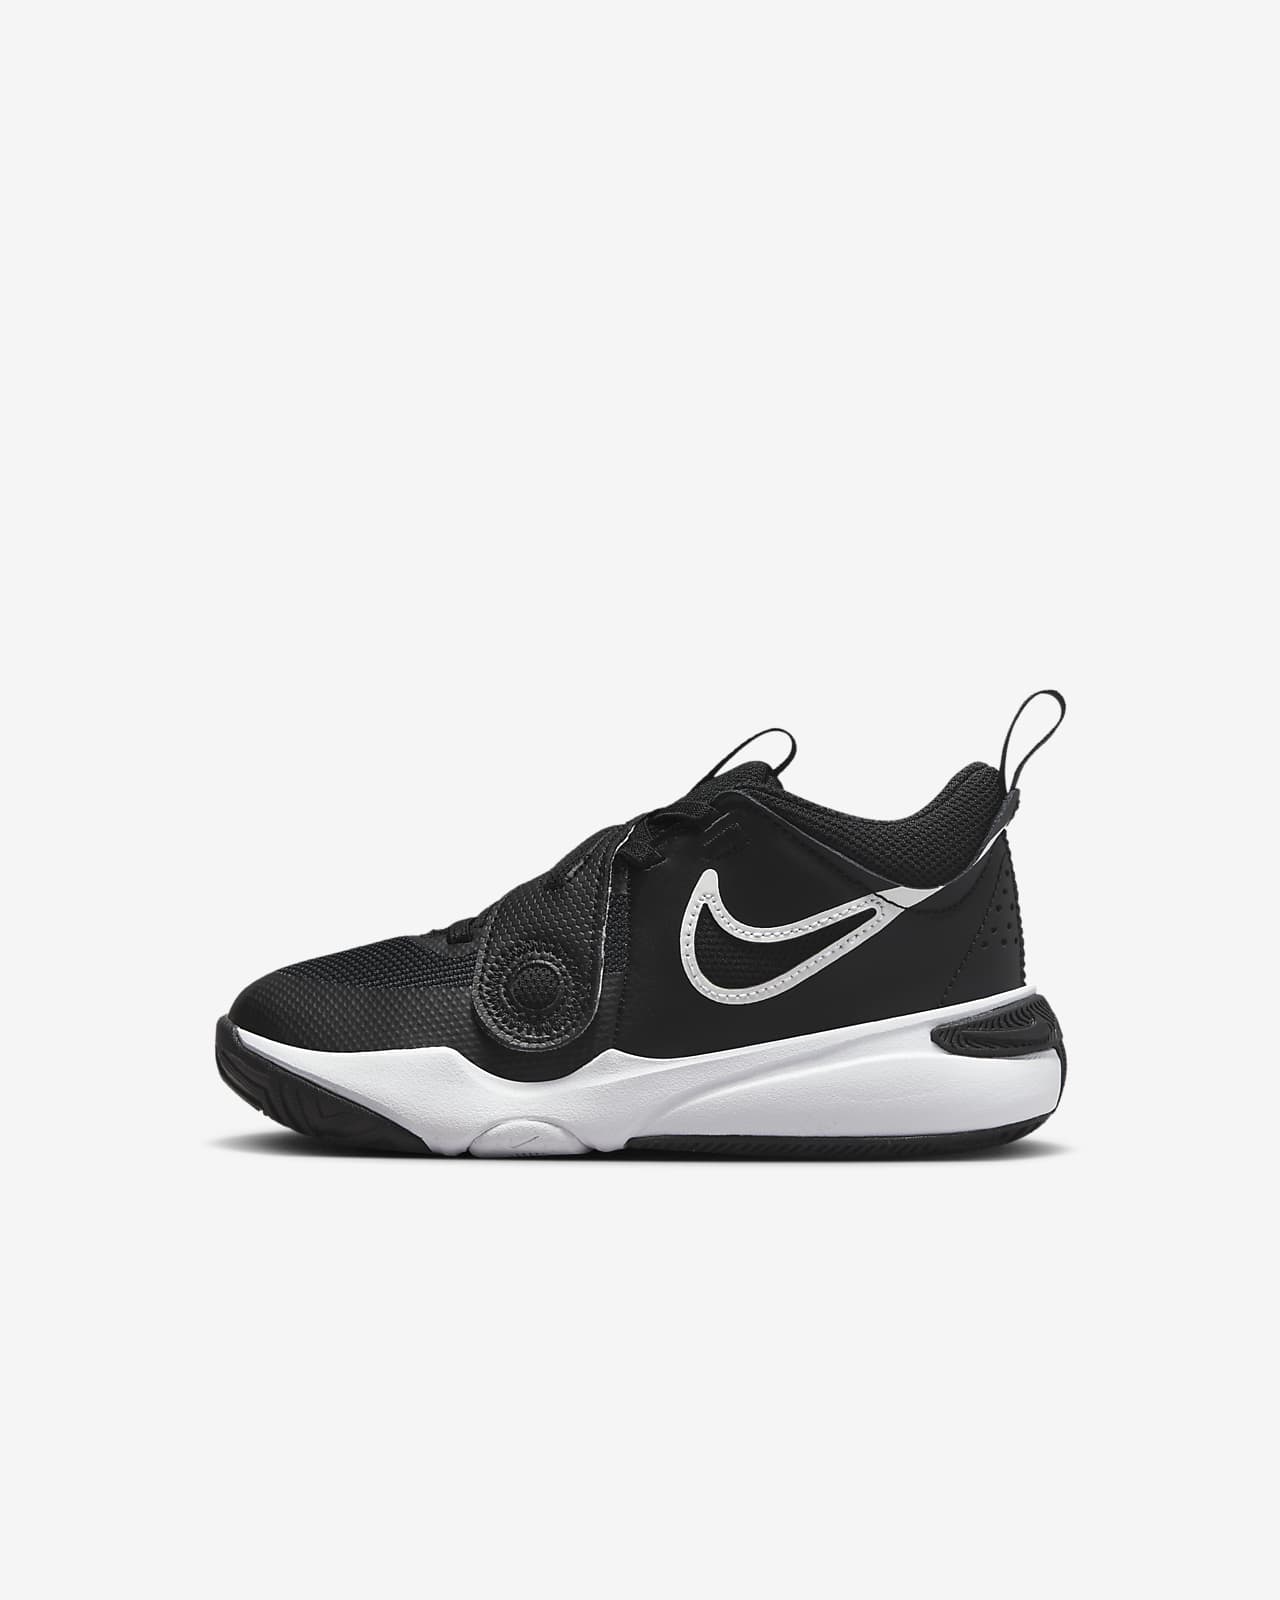 Nike Team Hustle D 11 Younger Kids' Shoes